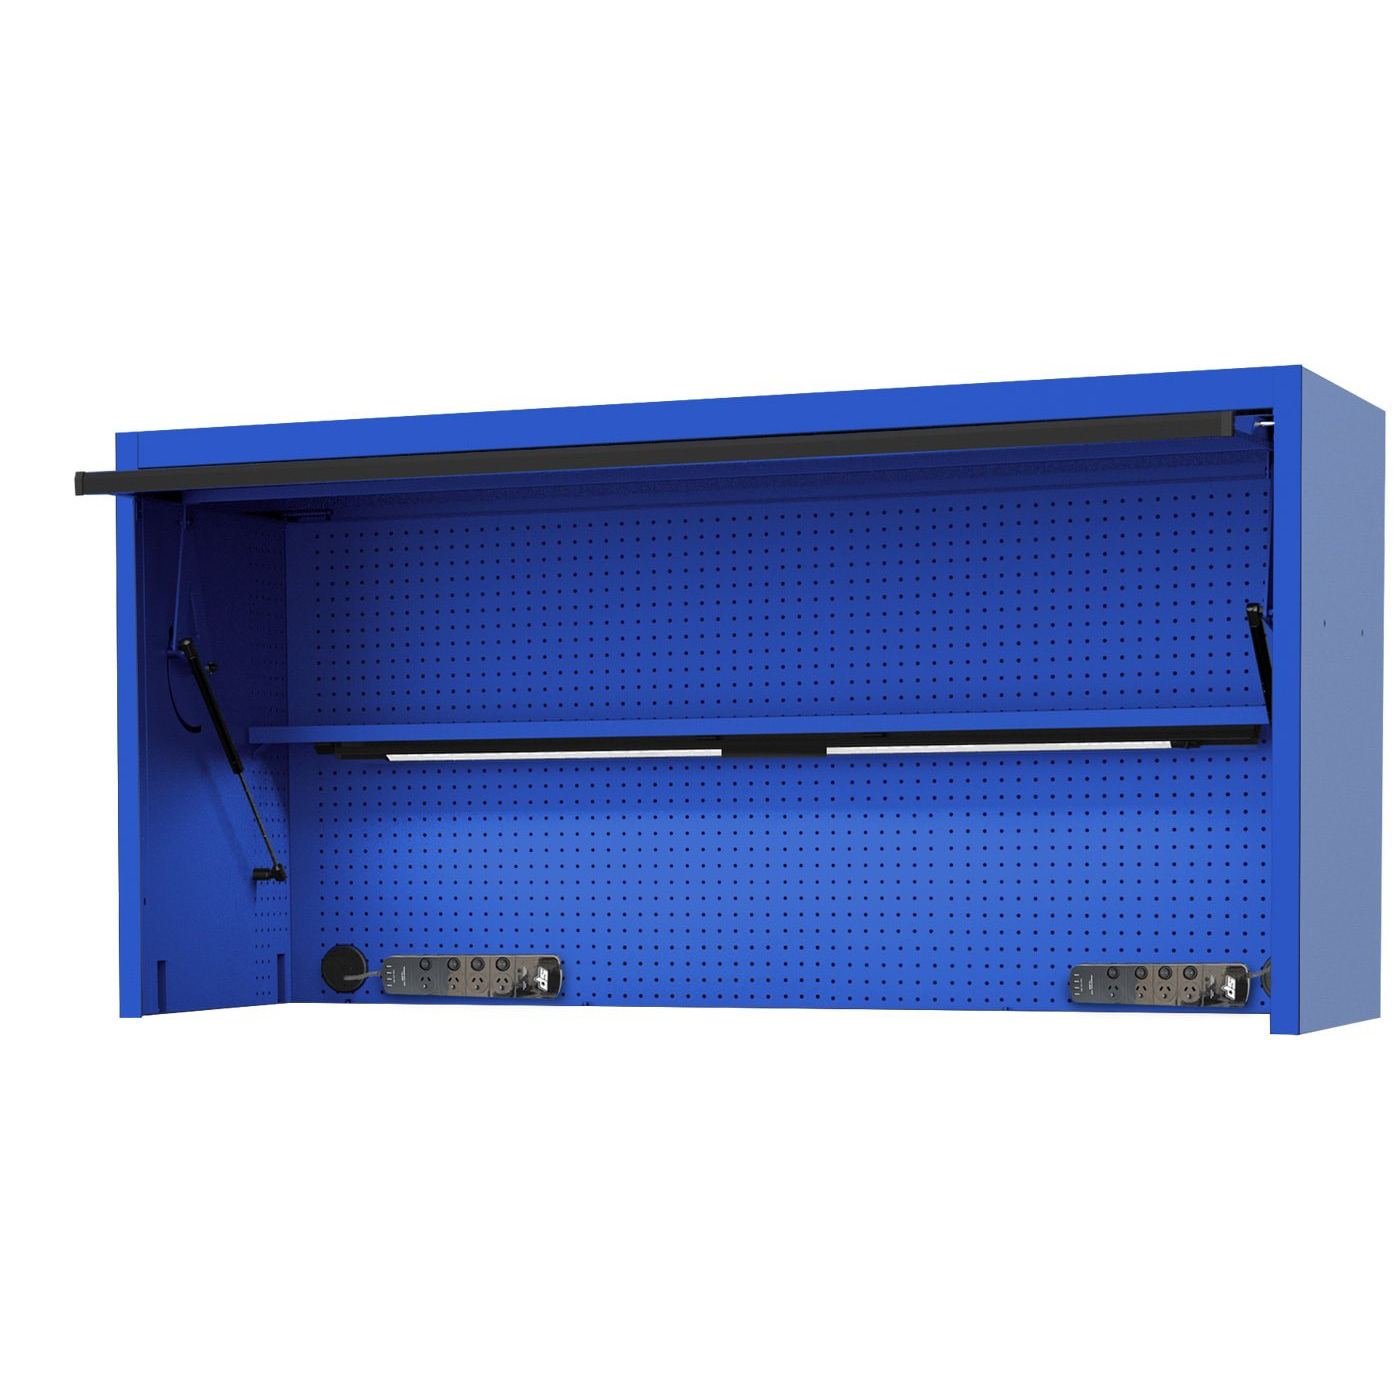 SP Tools 73" USA Sumo Series Wide Power Top Hutch - Blue/Black SP44830BL